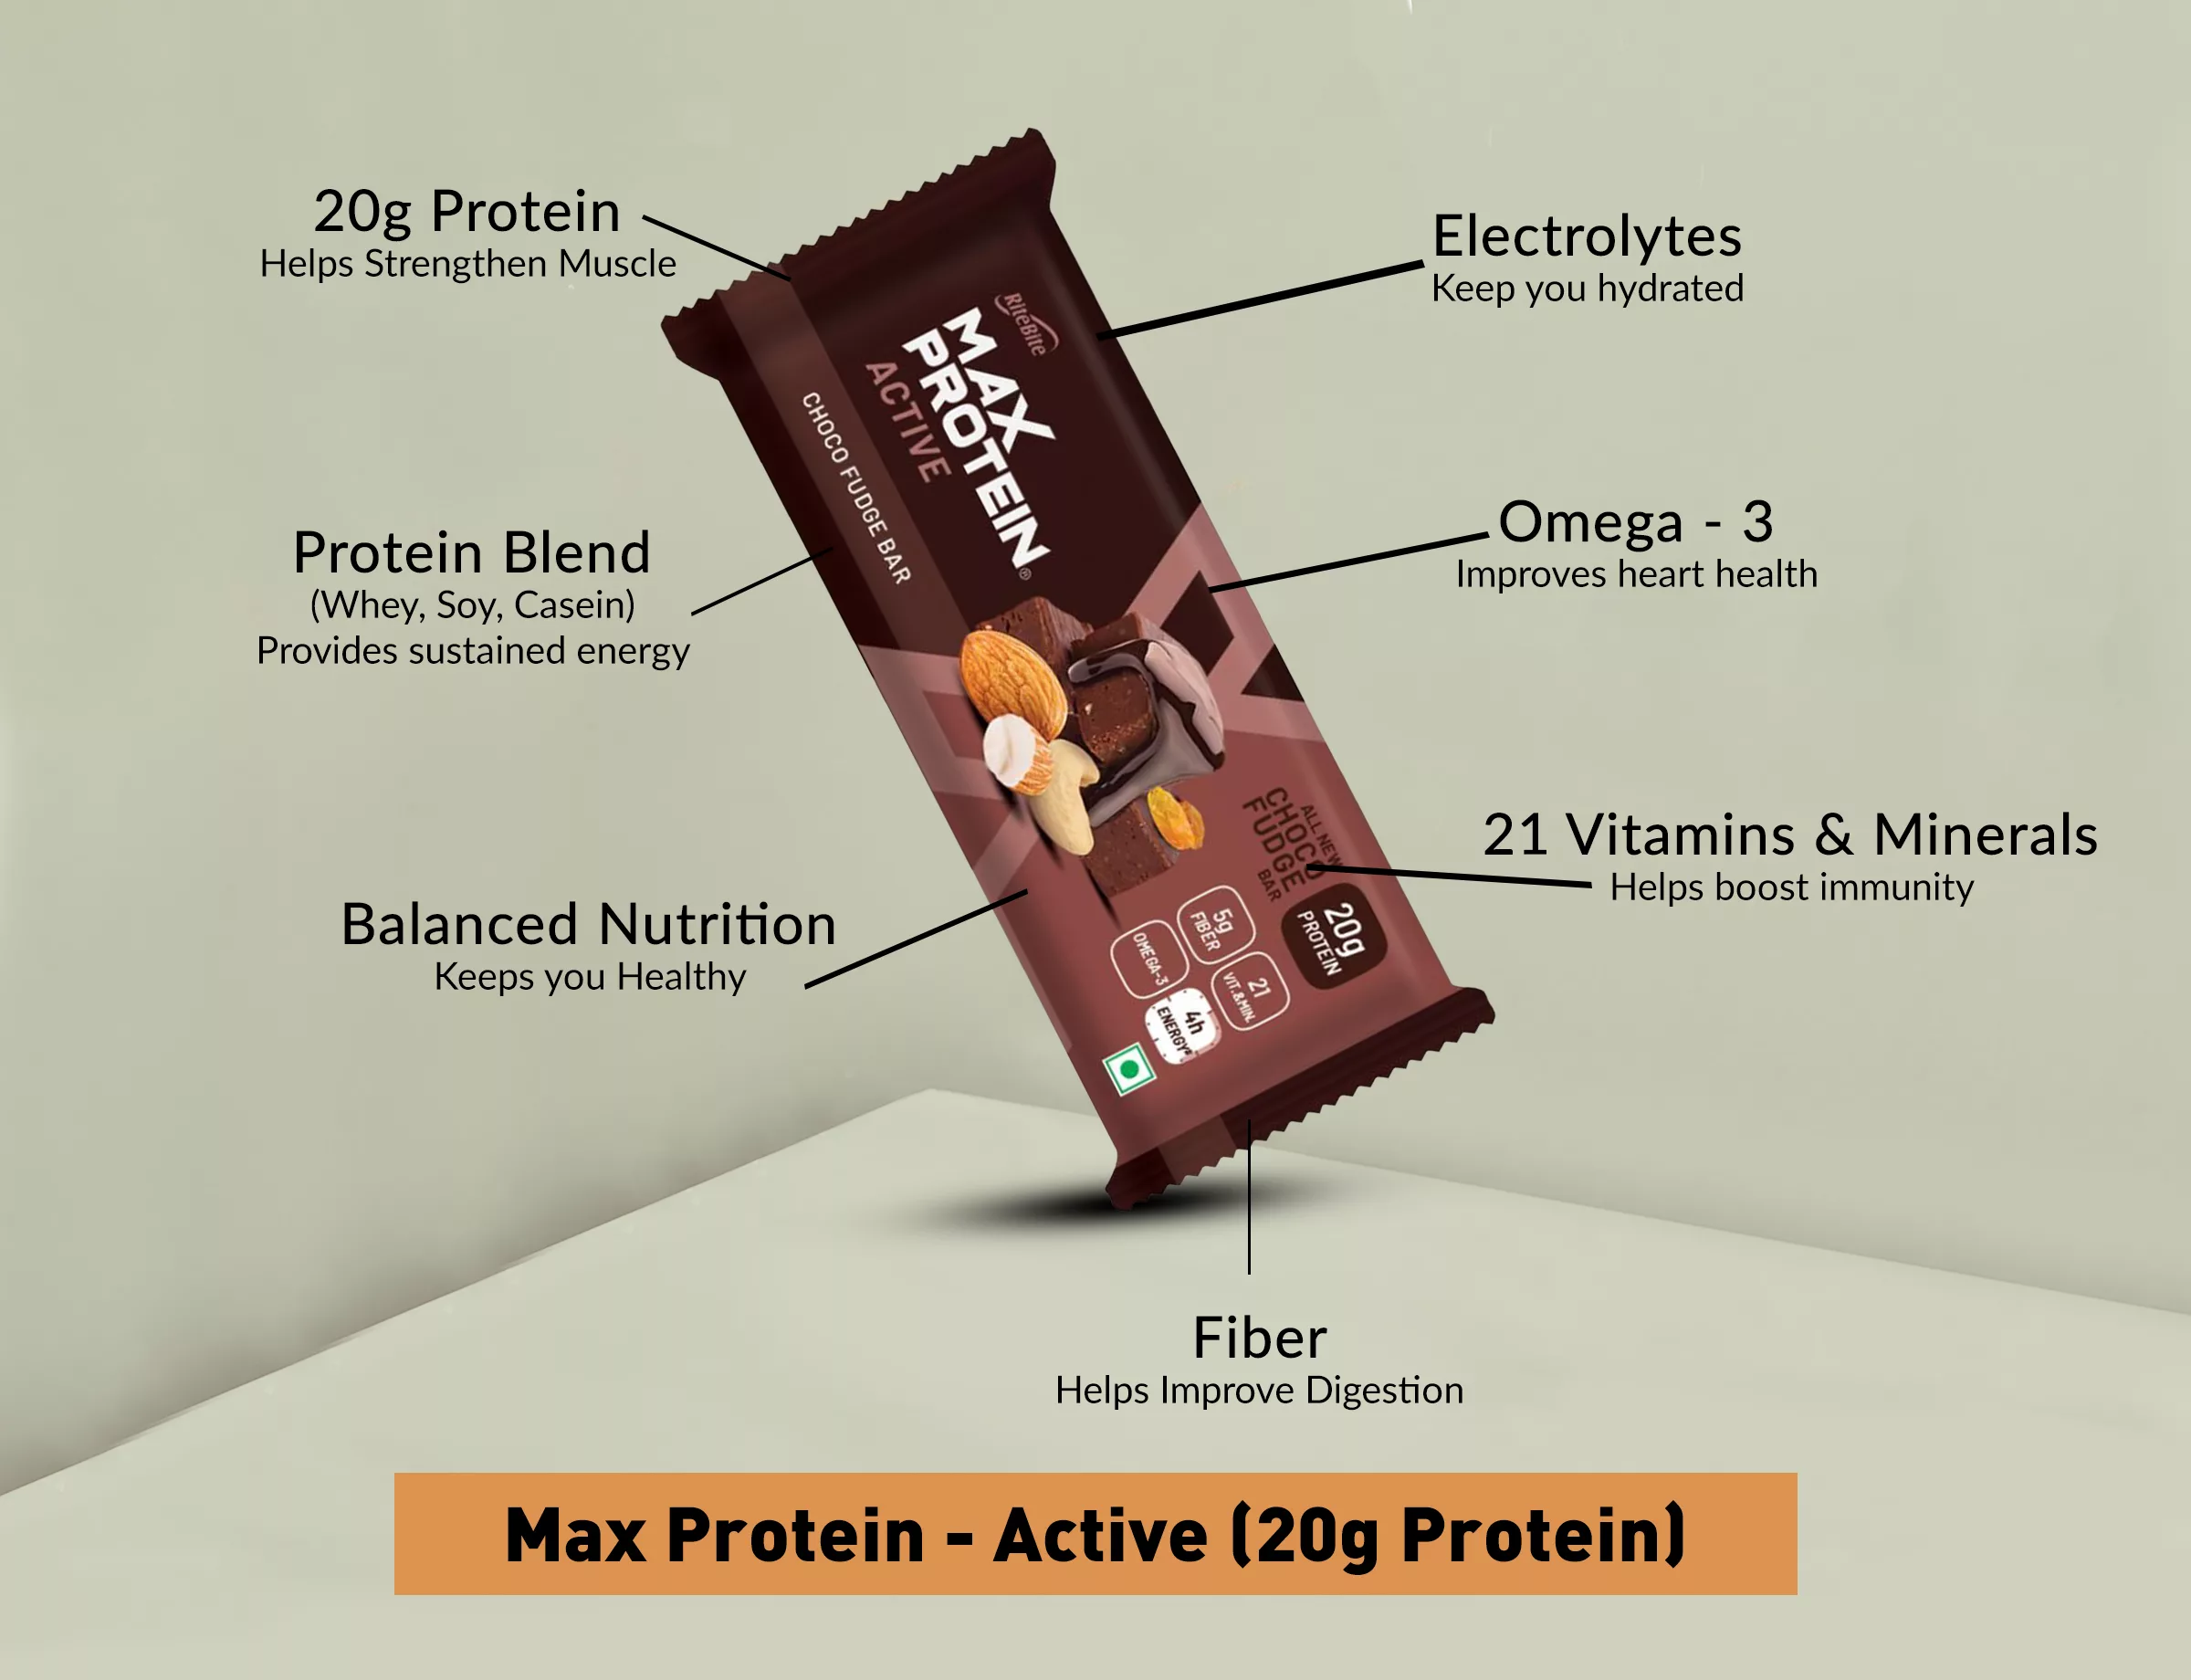 Benefits of Max Protein Active Protein Bars